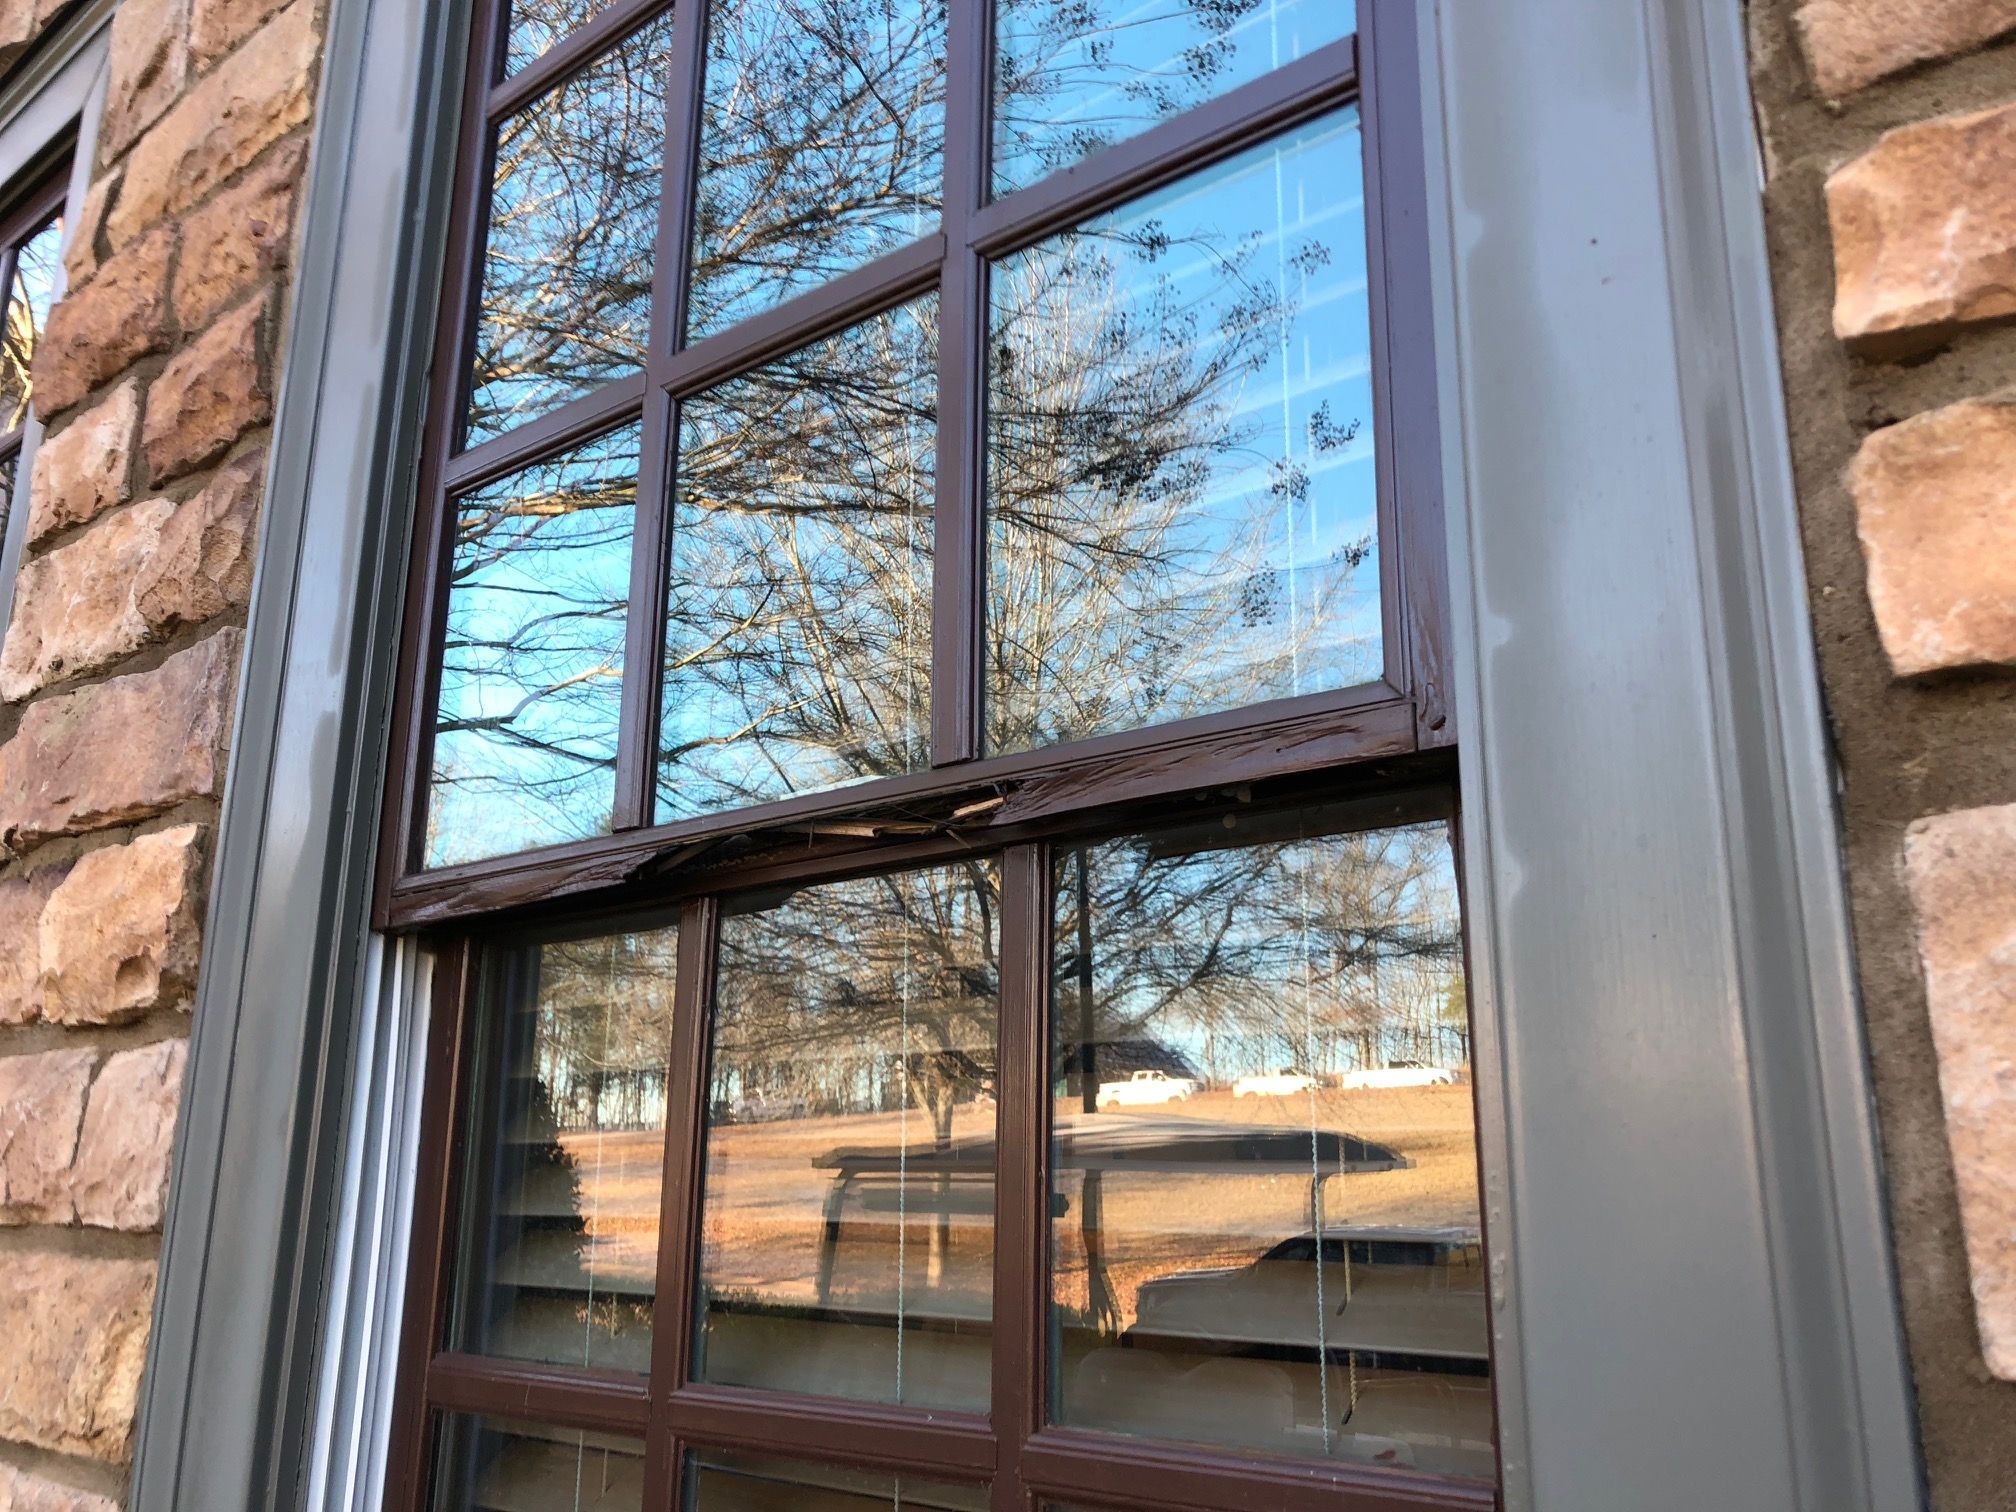 A good window can save on maintenance expenses